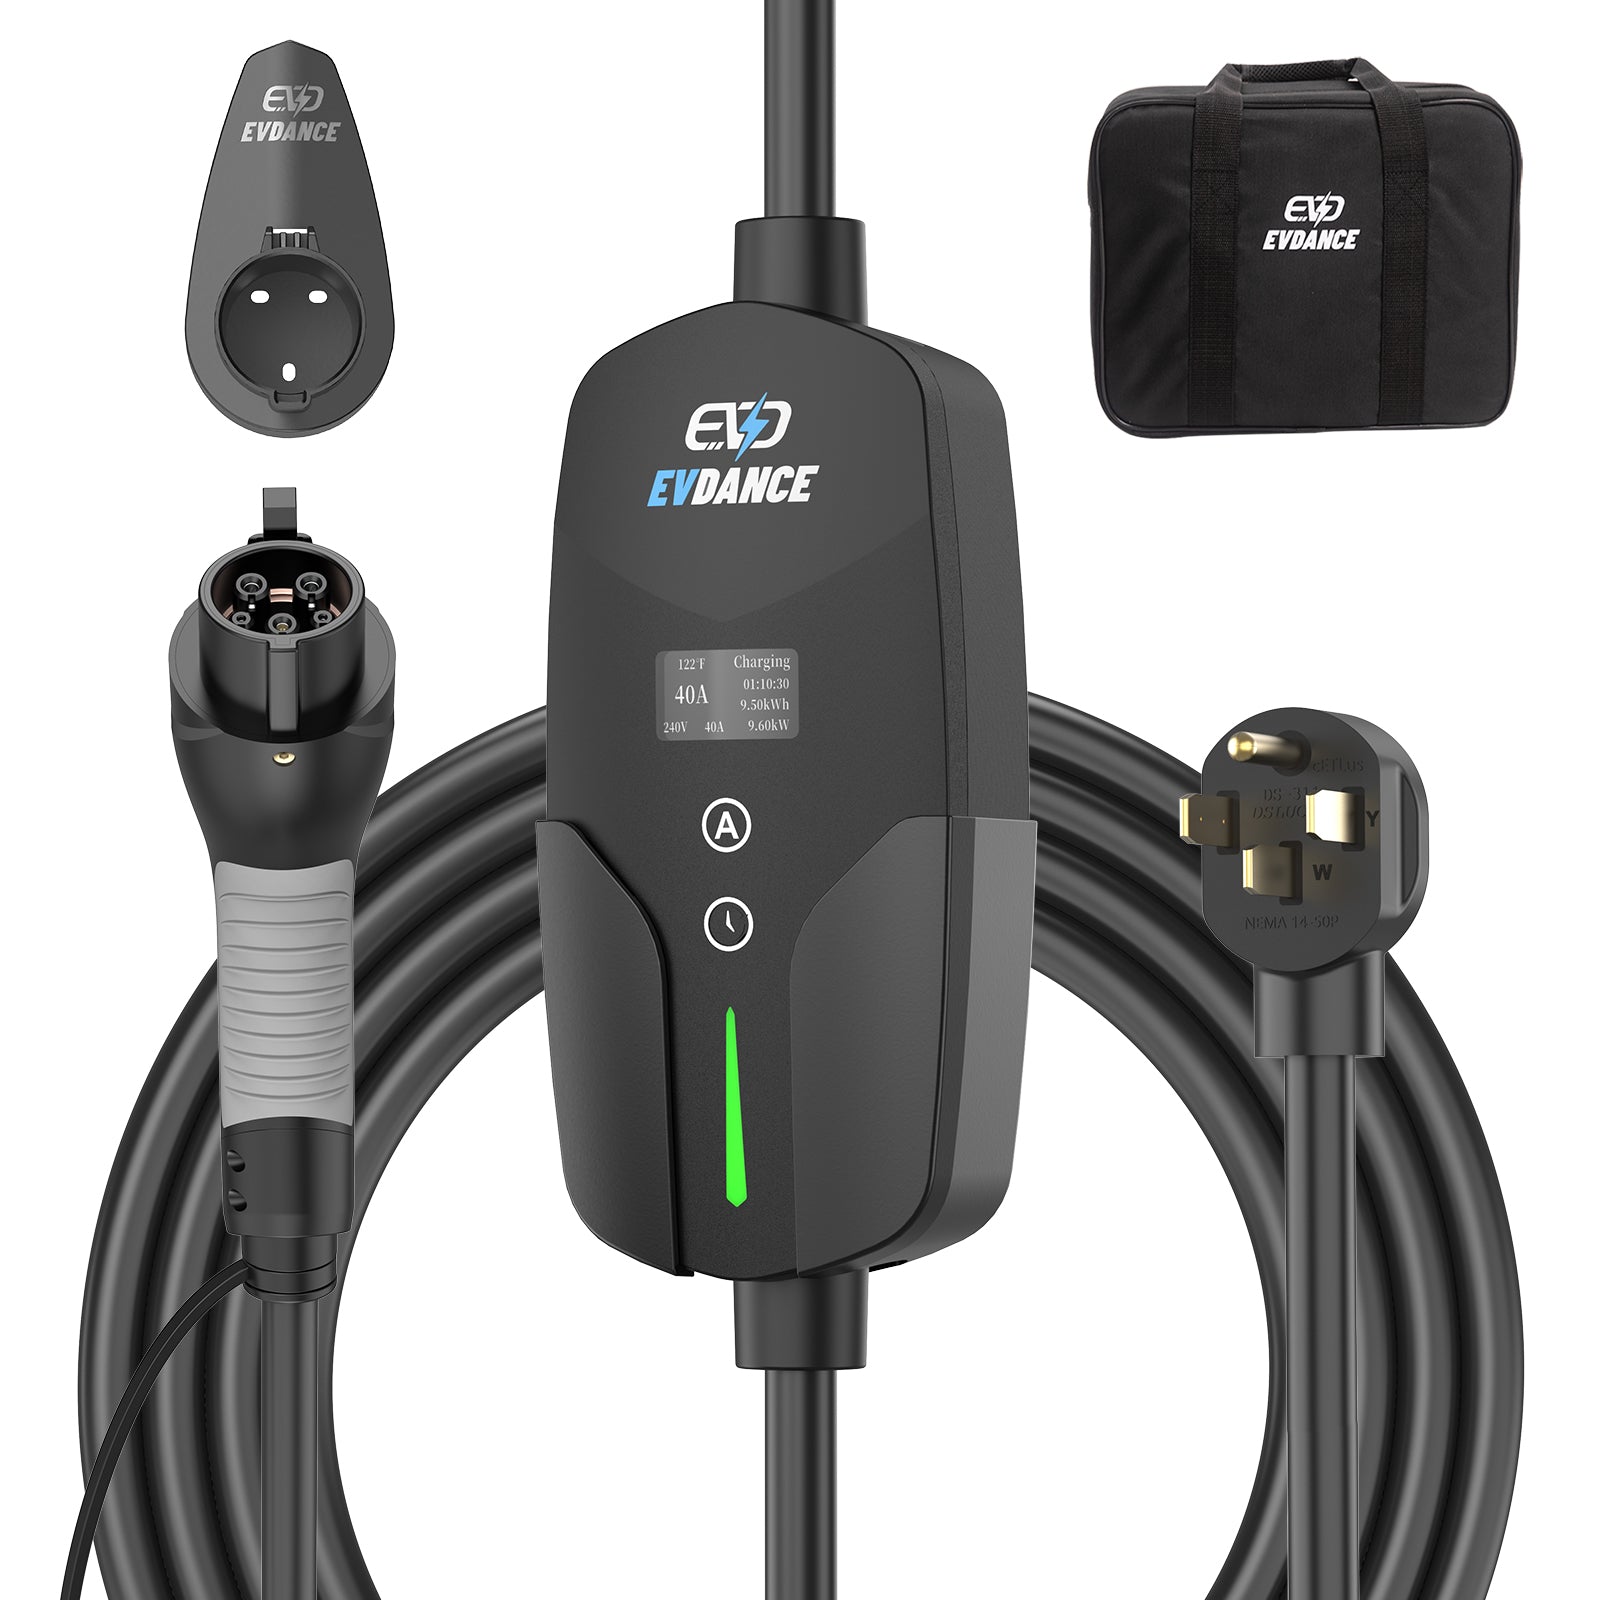 Plug-In Home Level 2 EV Charger